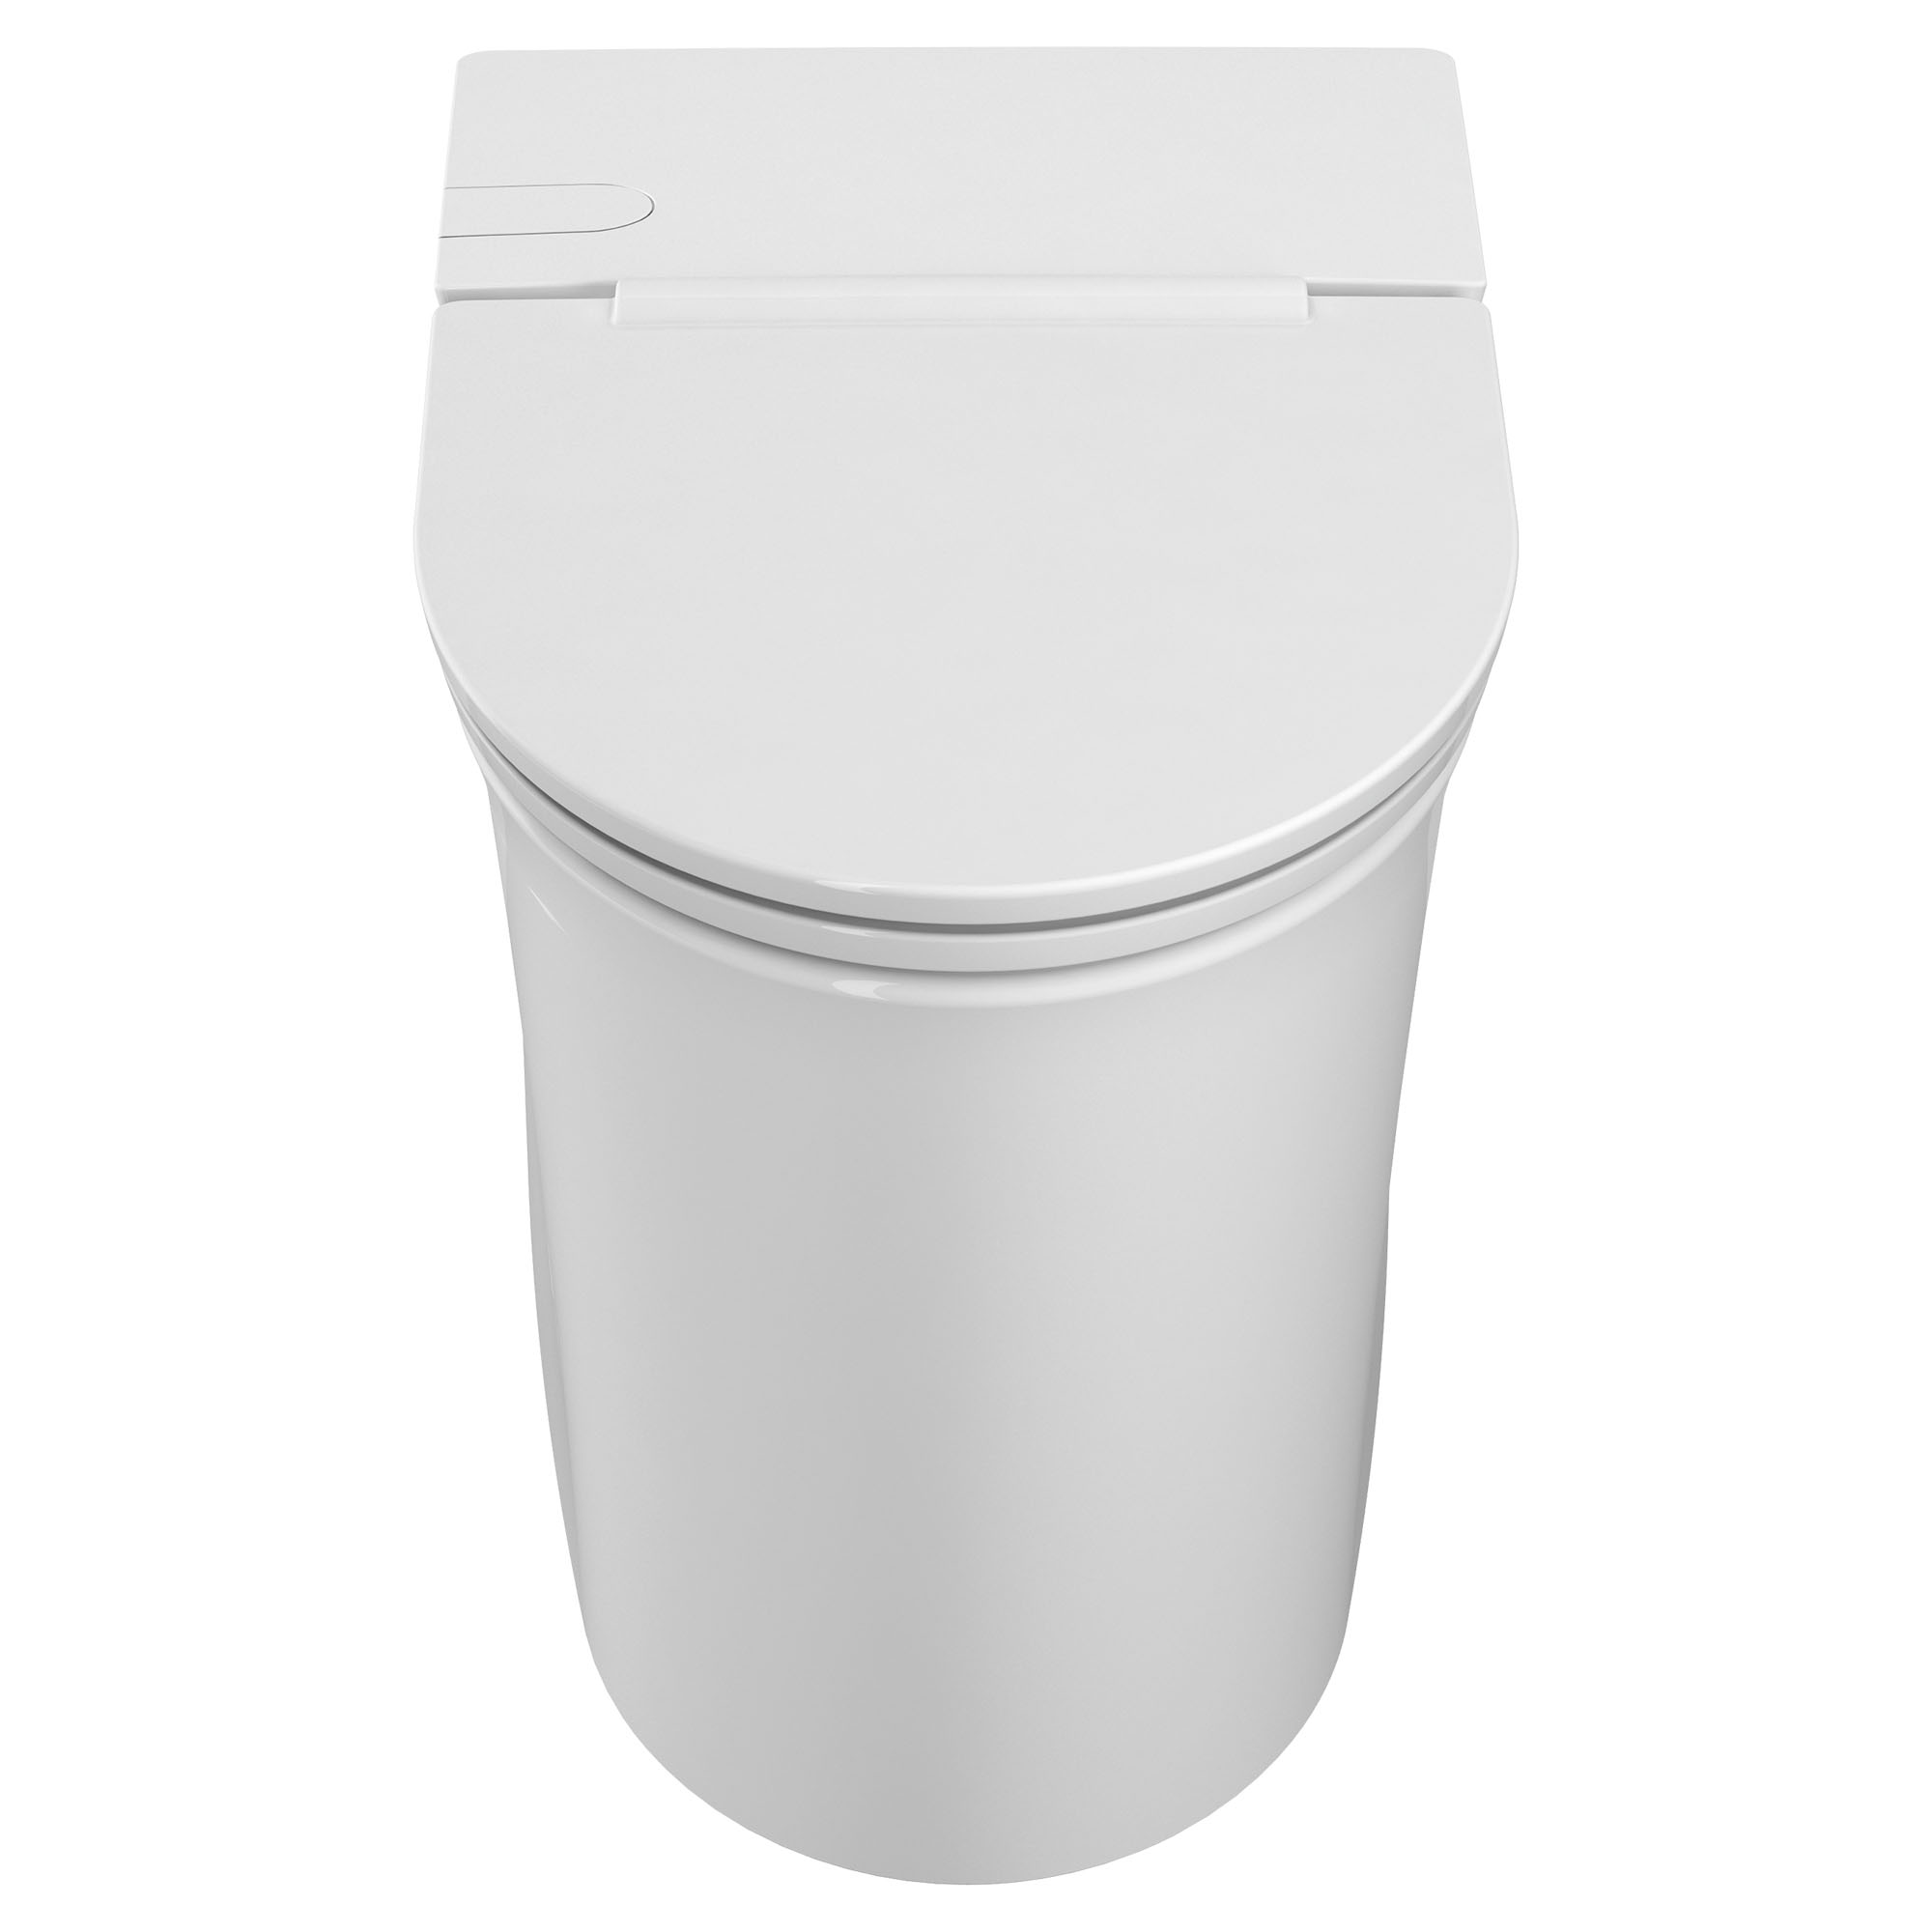 American Standard Studio S 1-piece 1.0 GPF White Elongated Low-Profile Toilet, Seat Included - image 2 of 14